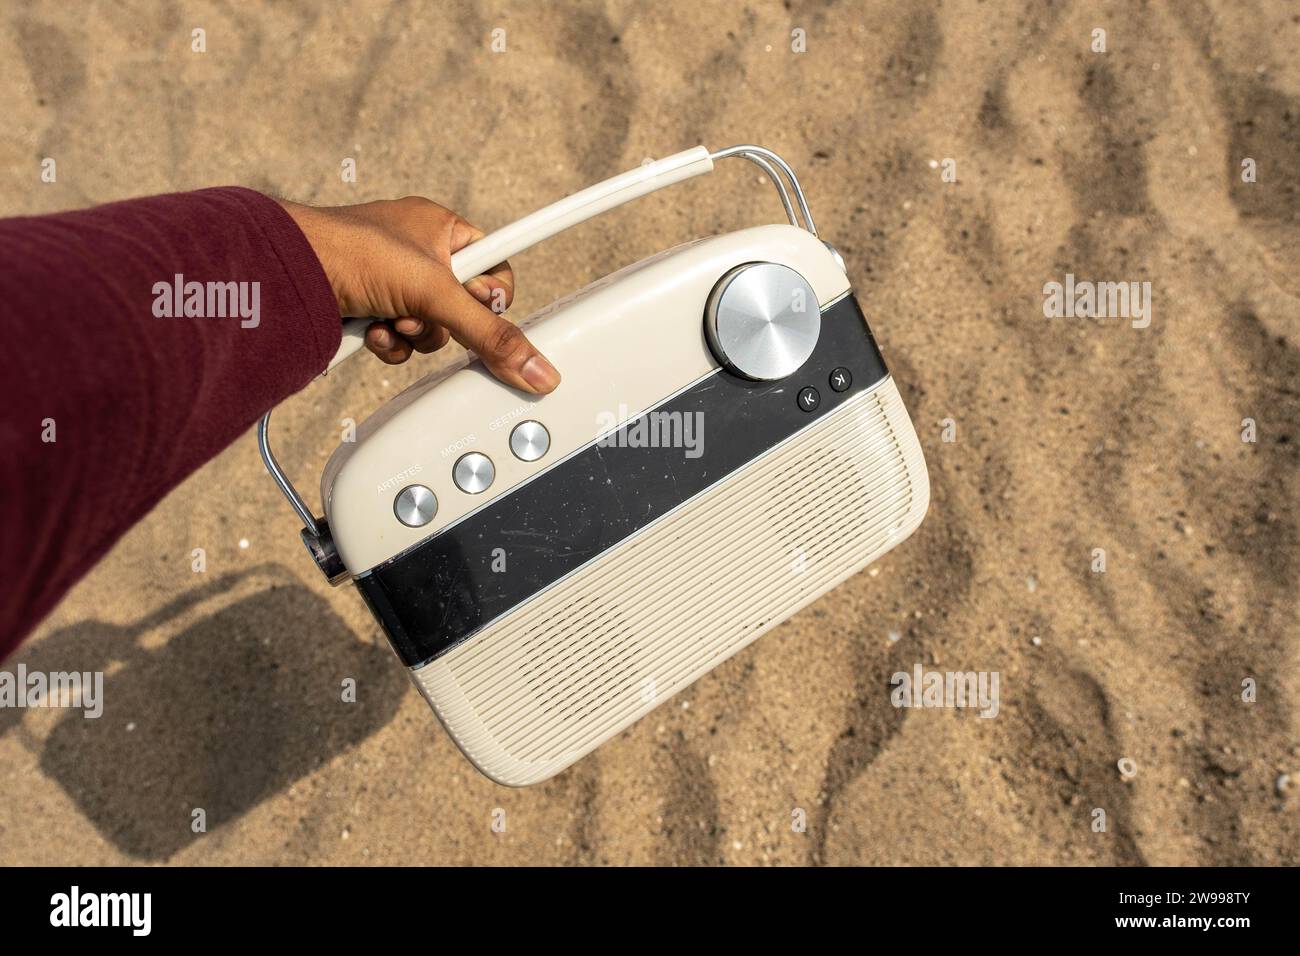 A young adult stands on a sandy beach, gesturing towards an old-fashioned radio sitting nearby Stock Photo